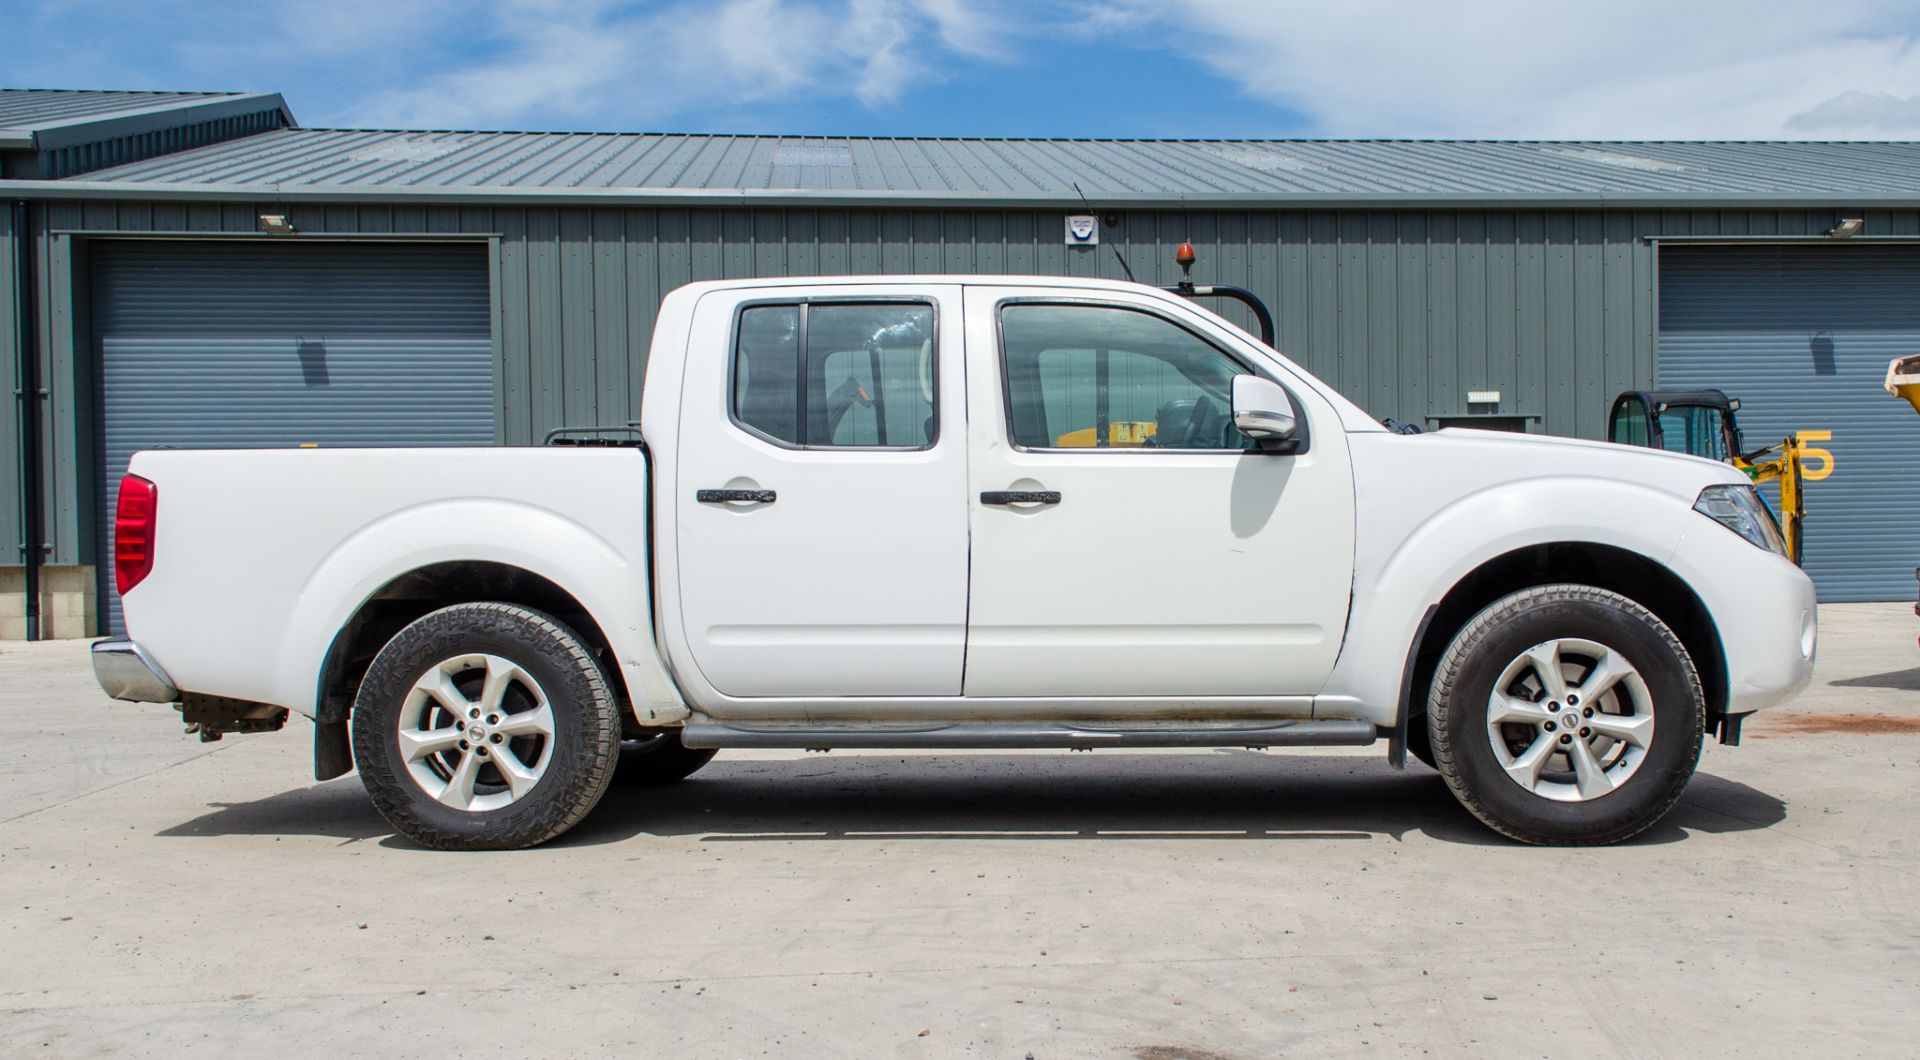 Nissan Navara Acenta DCI 6 speed manual double cab pick up Registration Number: DF63 HPP Date of - Image 8 of 31